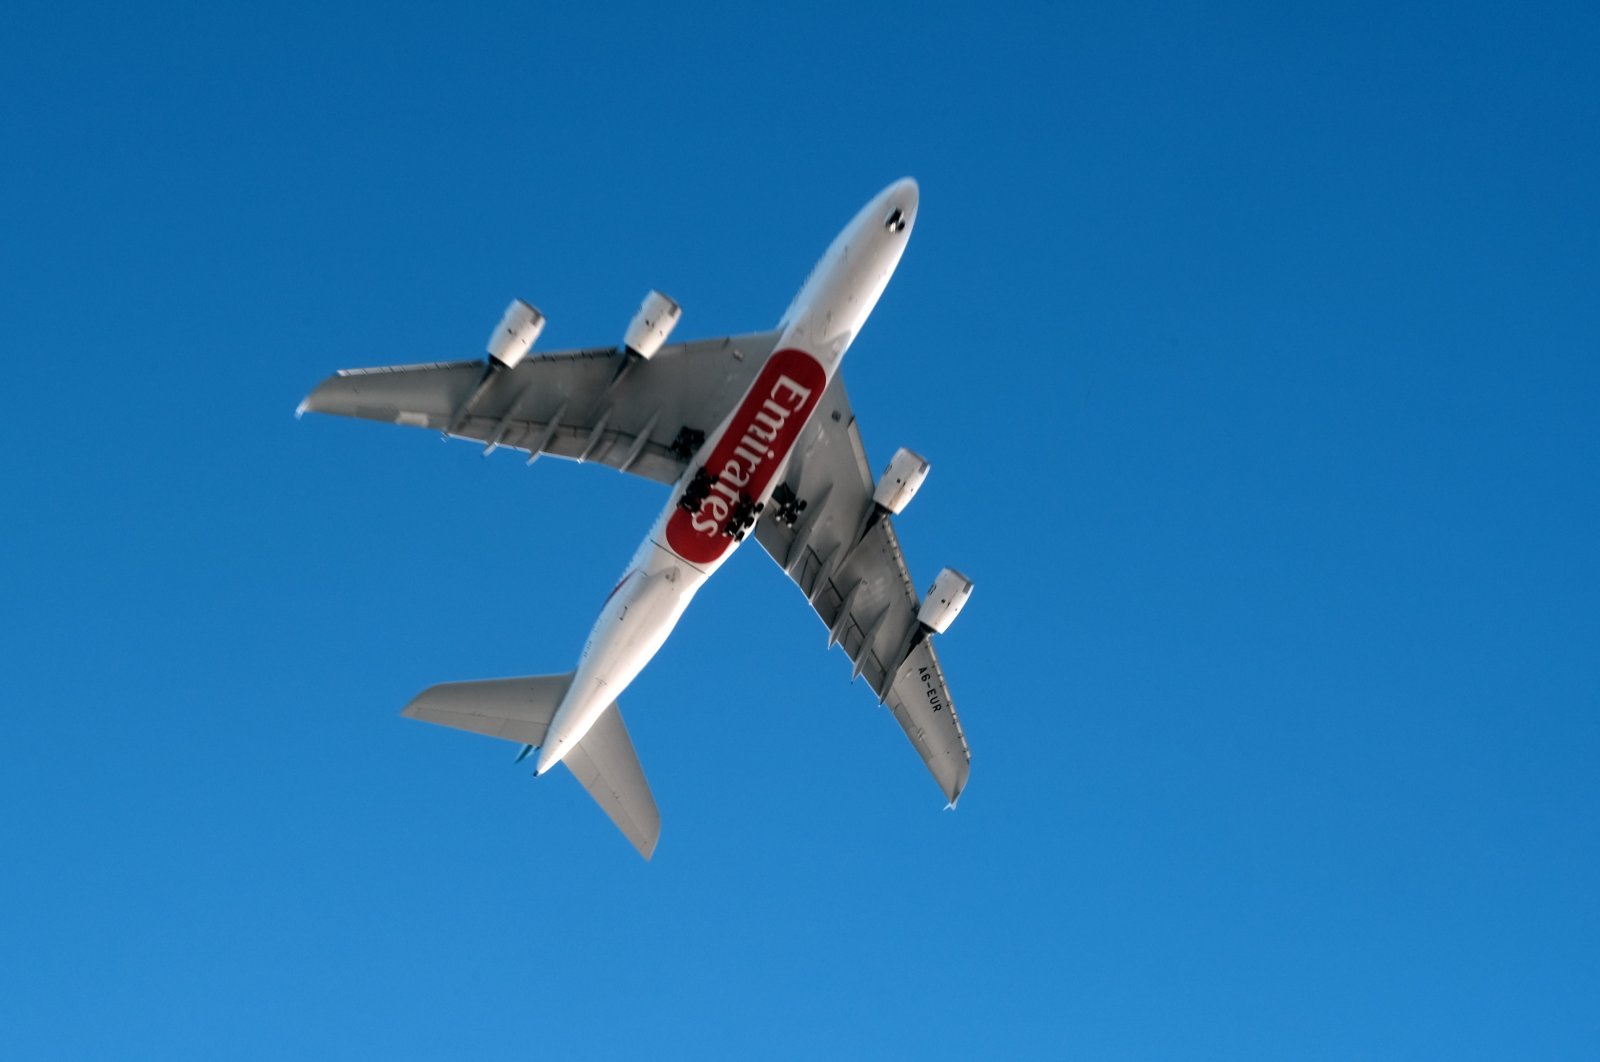 An Emirates airliner makes its approach into JFK Airport, New York, U.S., Nov. 8, 2021. (Getty Images via AFP)